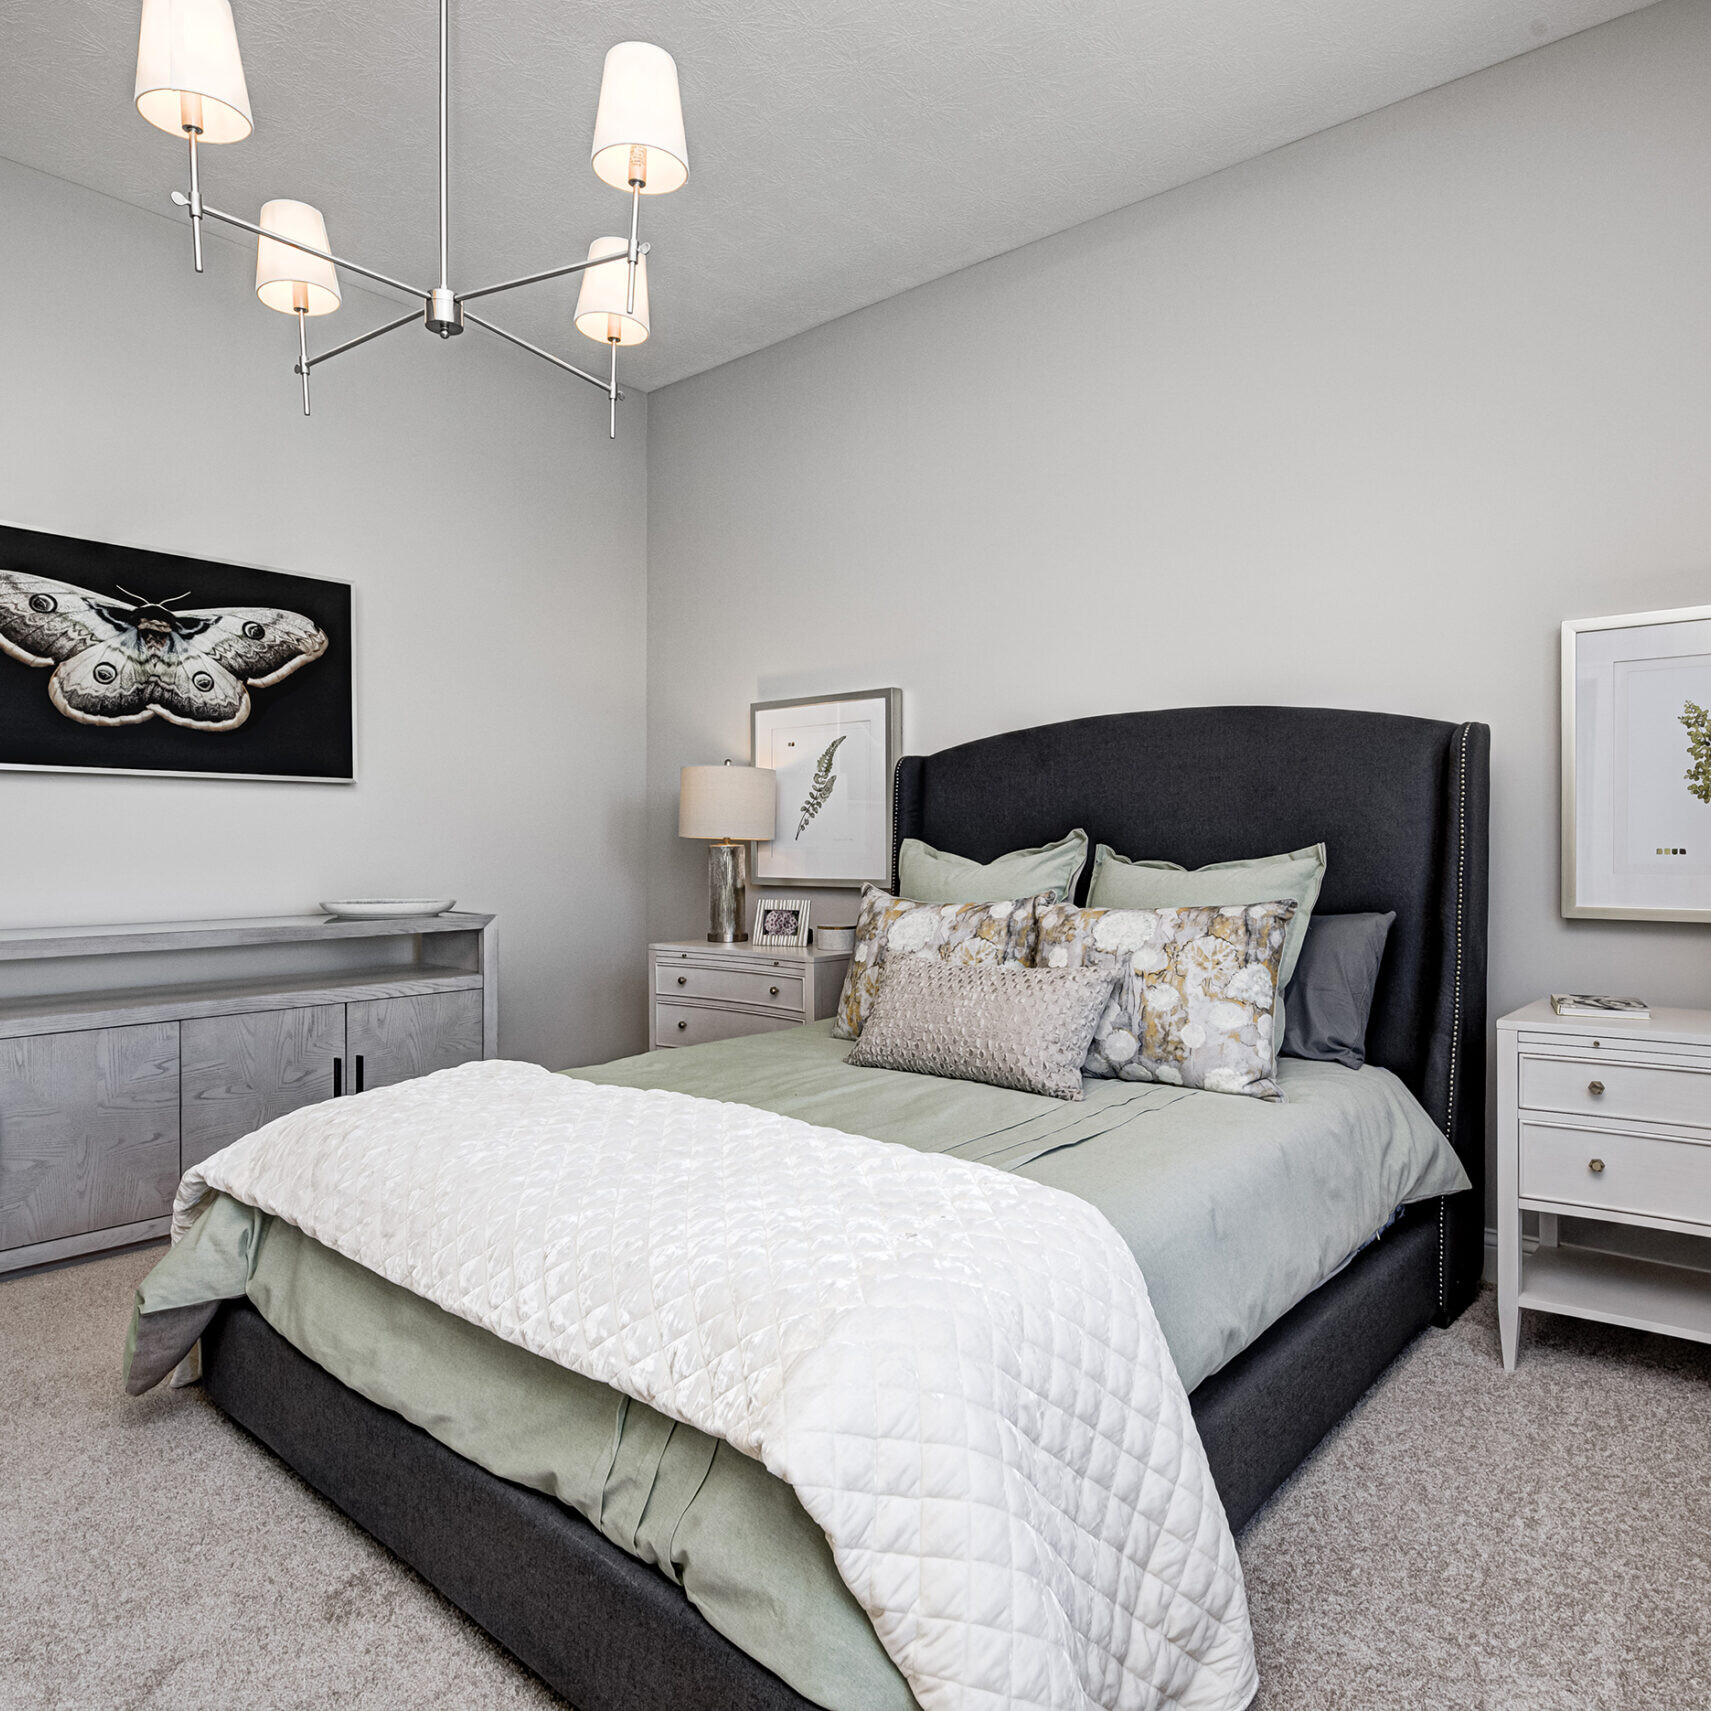 A bedroom with a gray bed and dresser, furnished by a Custom Home Builder in Indiana.